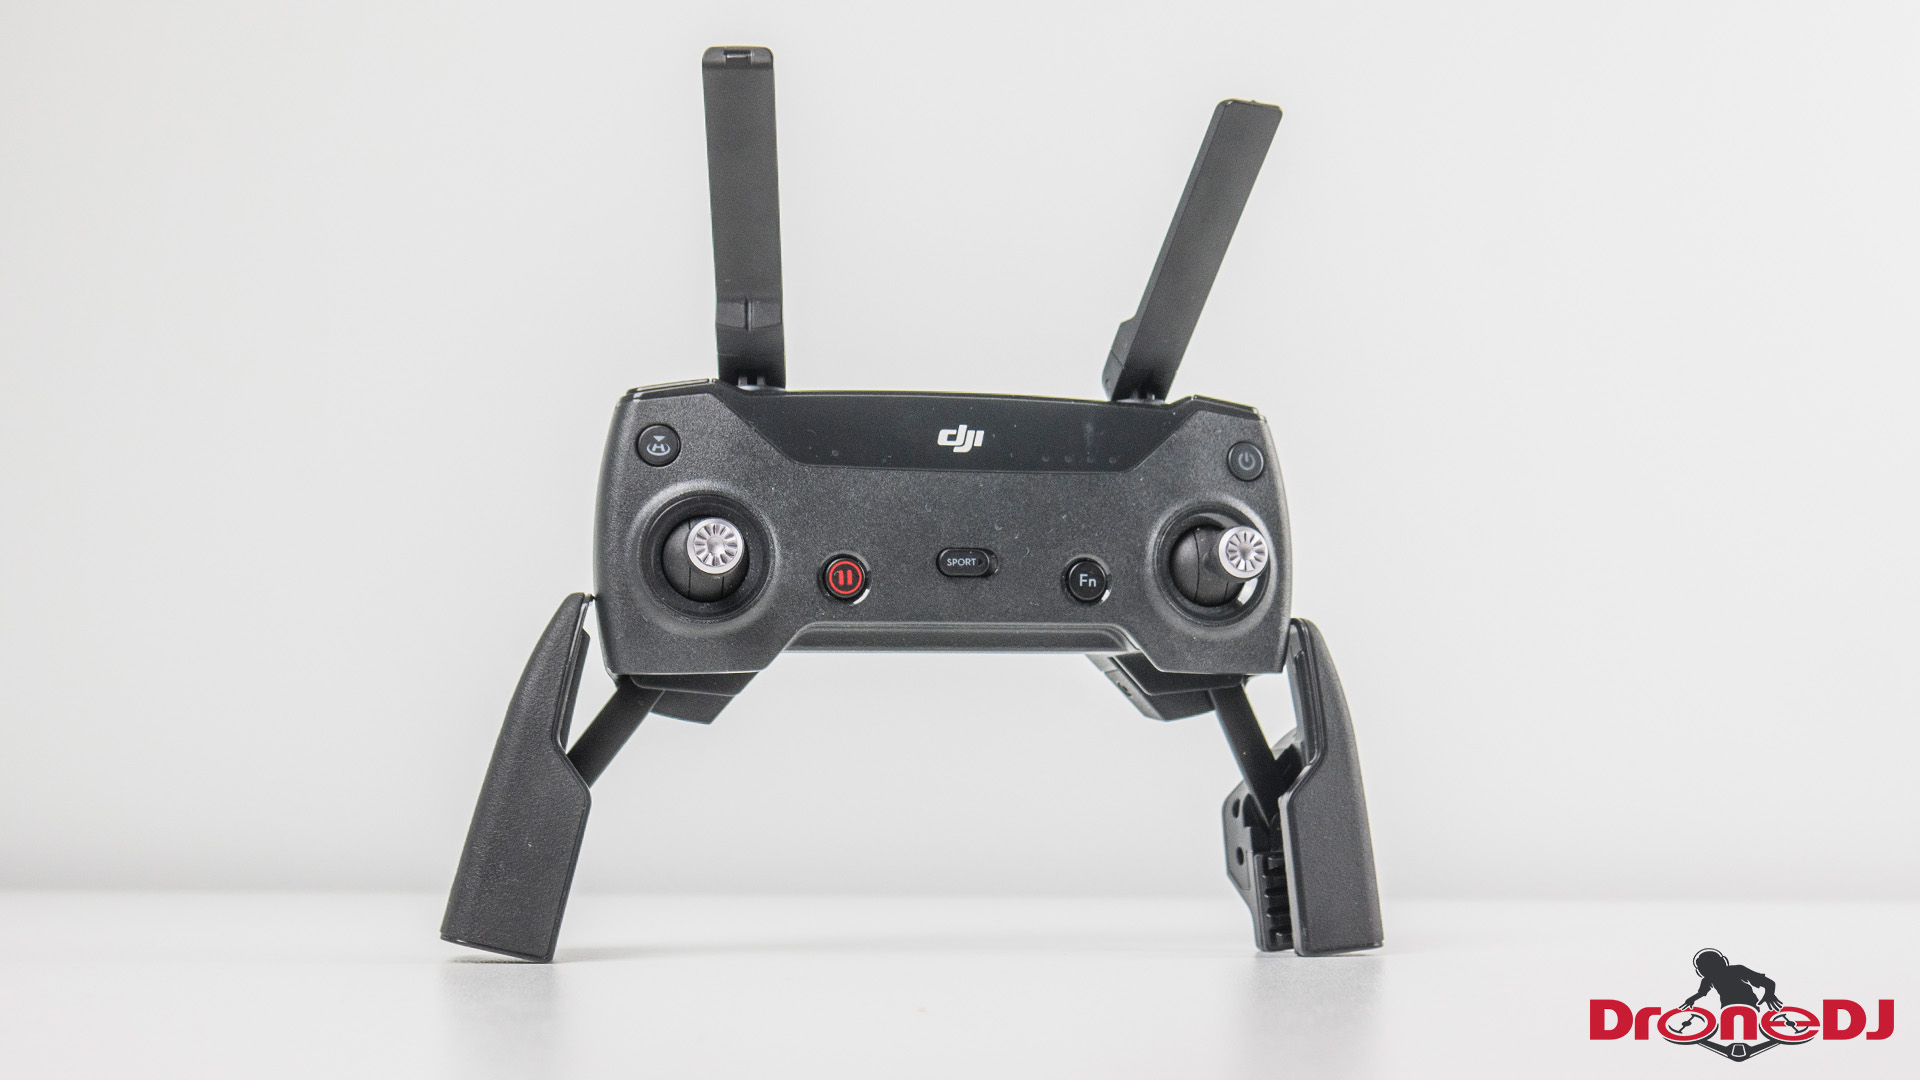 Why we won’t see a new DJI Spark in 2018